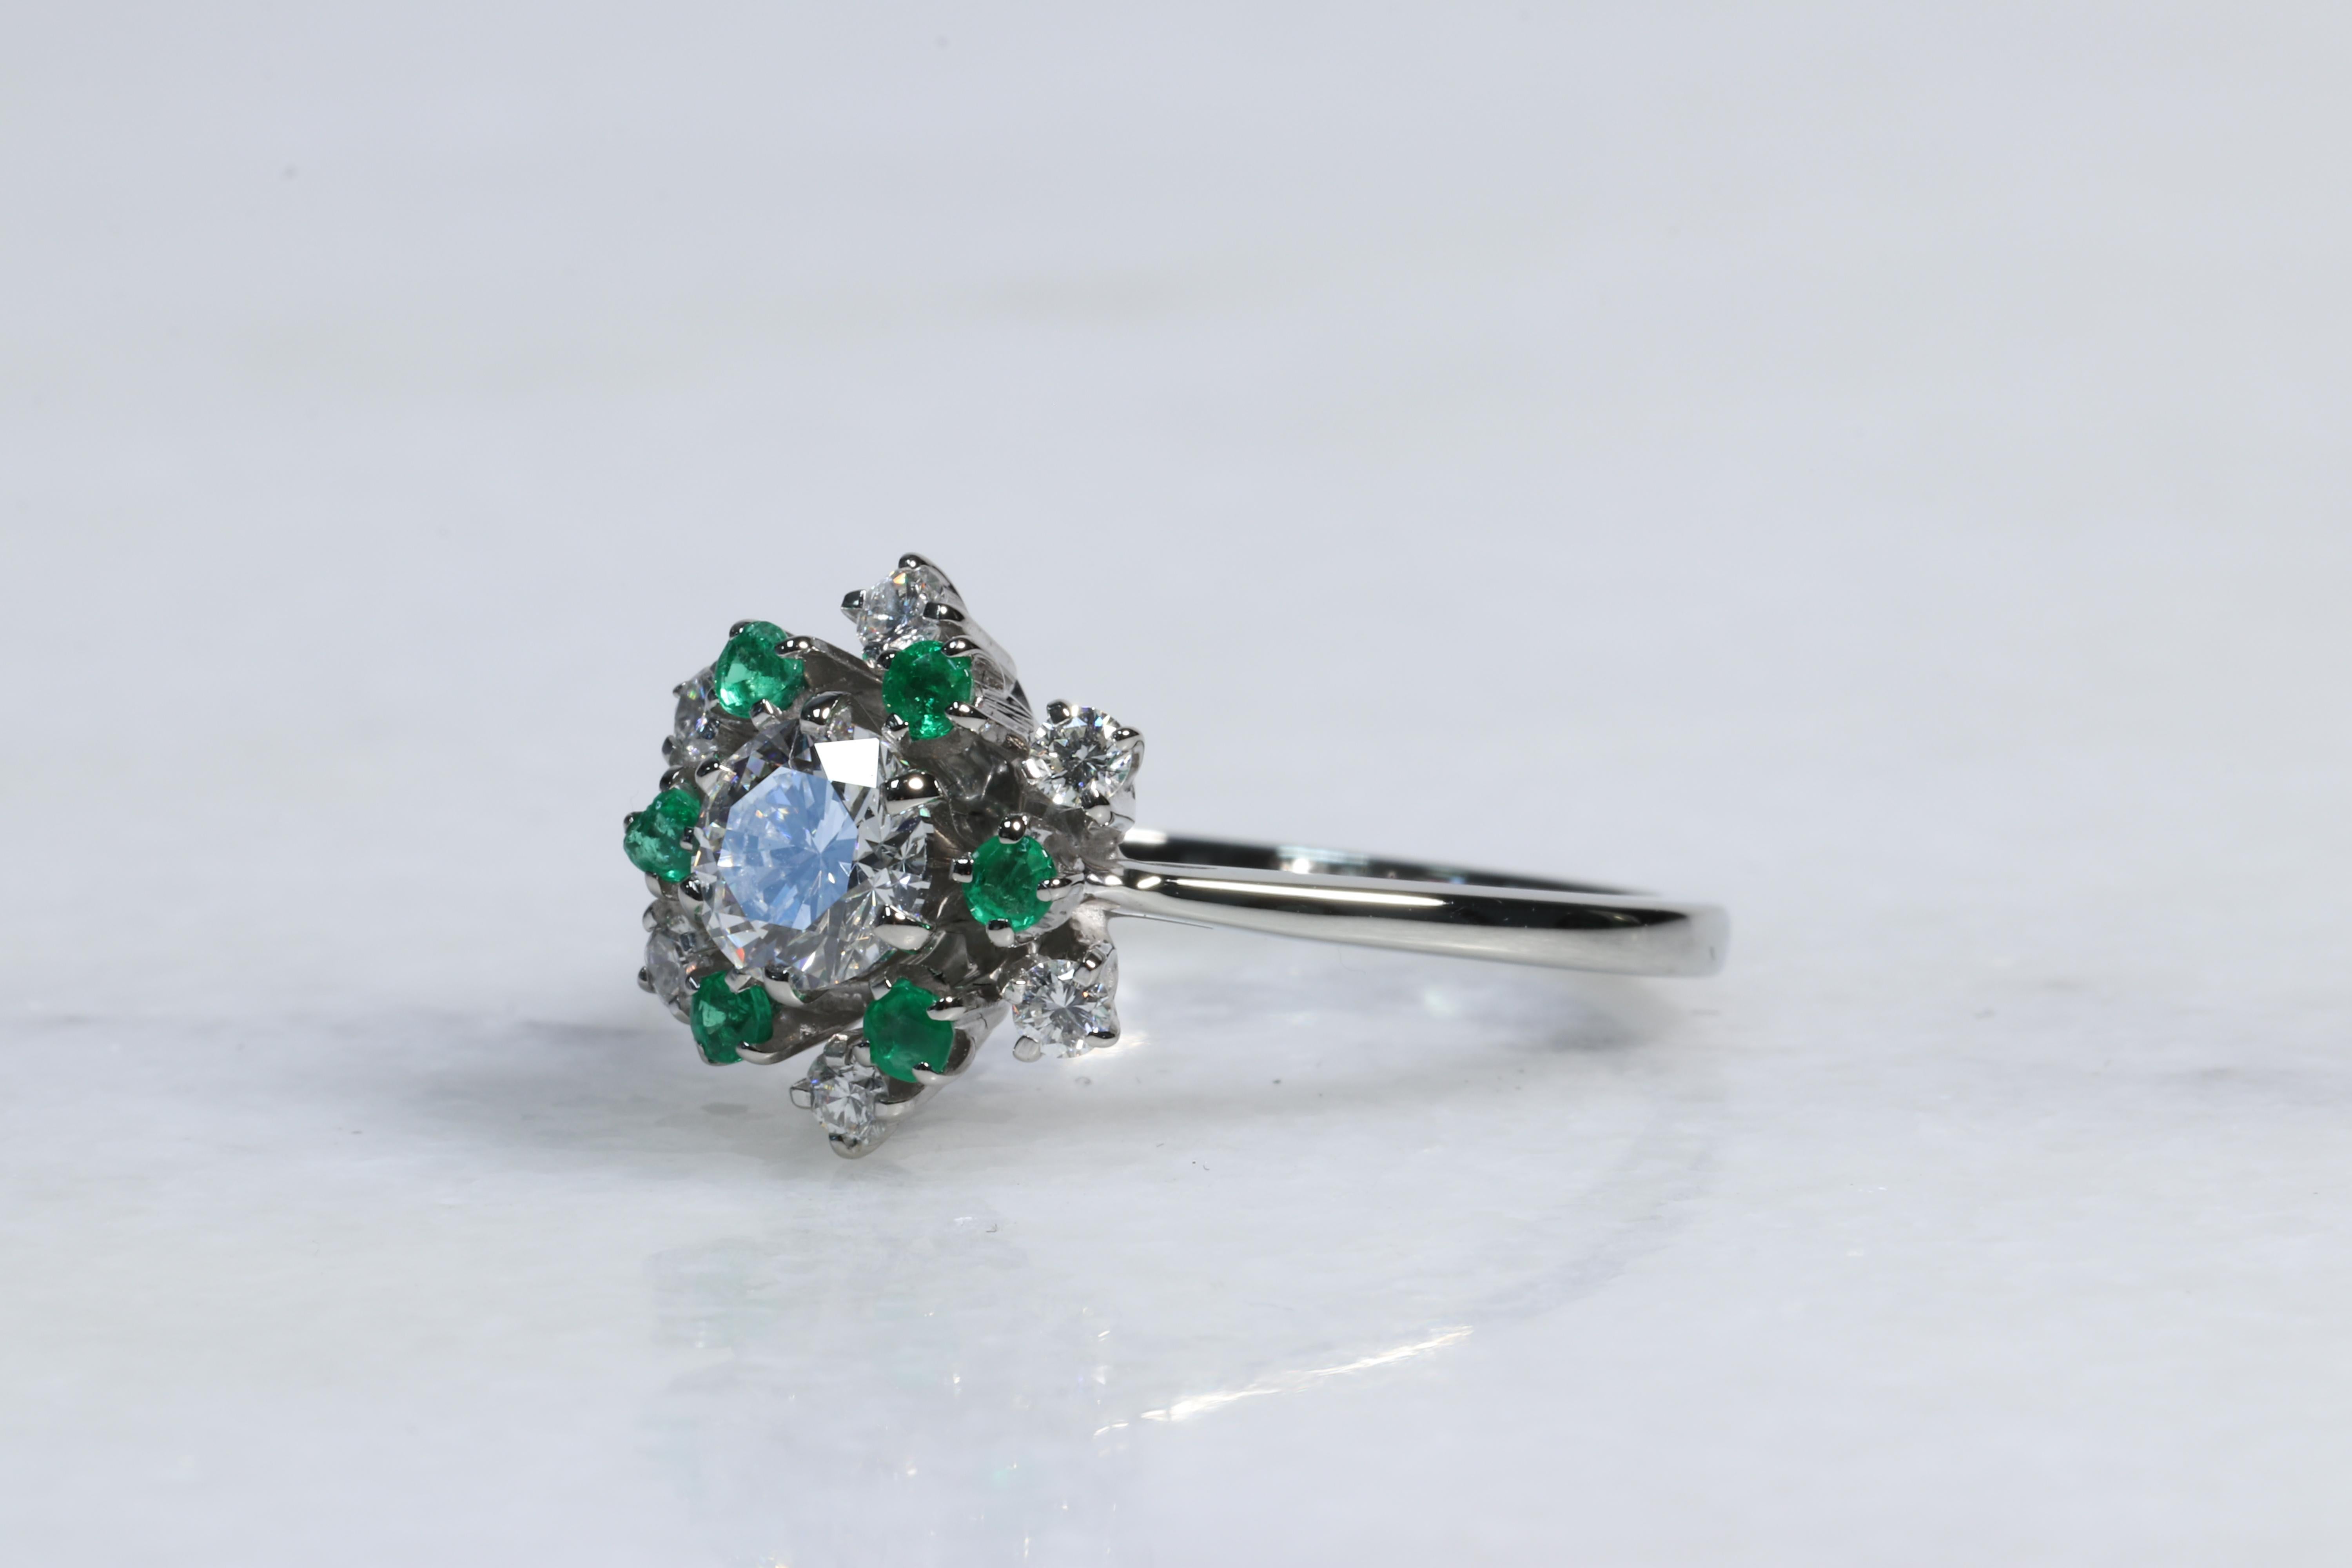 Jabel Diamond and Emerald Halo Snowflake Ring 

Cute and dainty diamond and emerald ring by Jabel, a company known for their fine craftsmanship and materials utilized in their heirloom quality jewelry, likened to Tiffany & Co. The ring features a